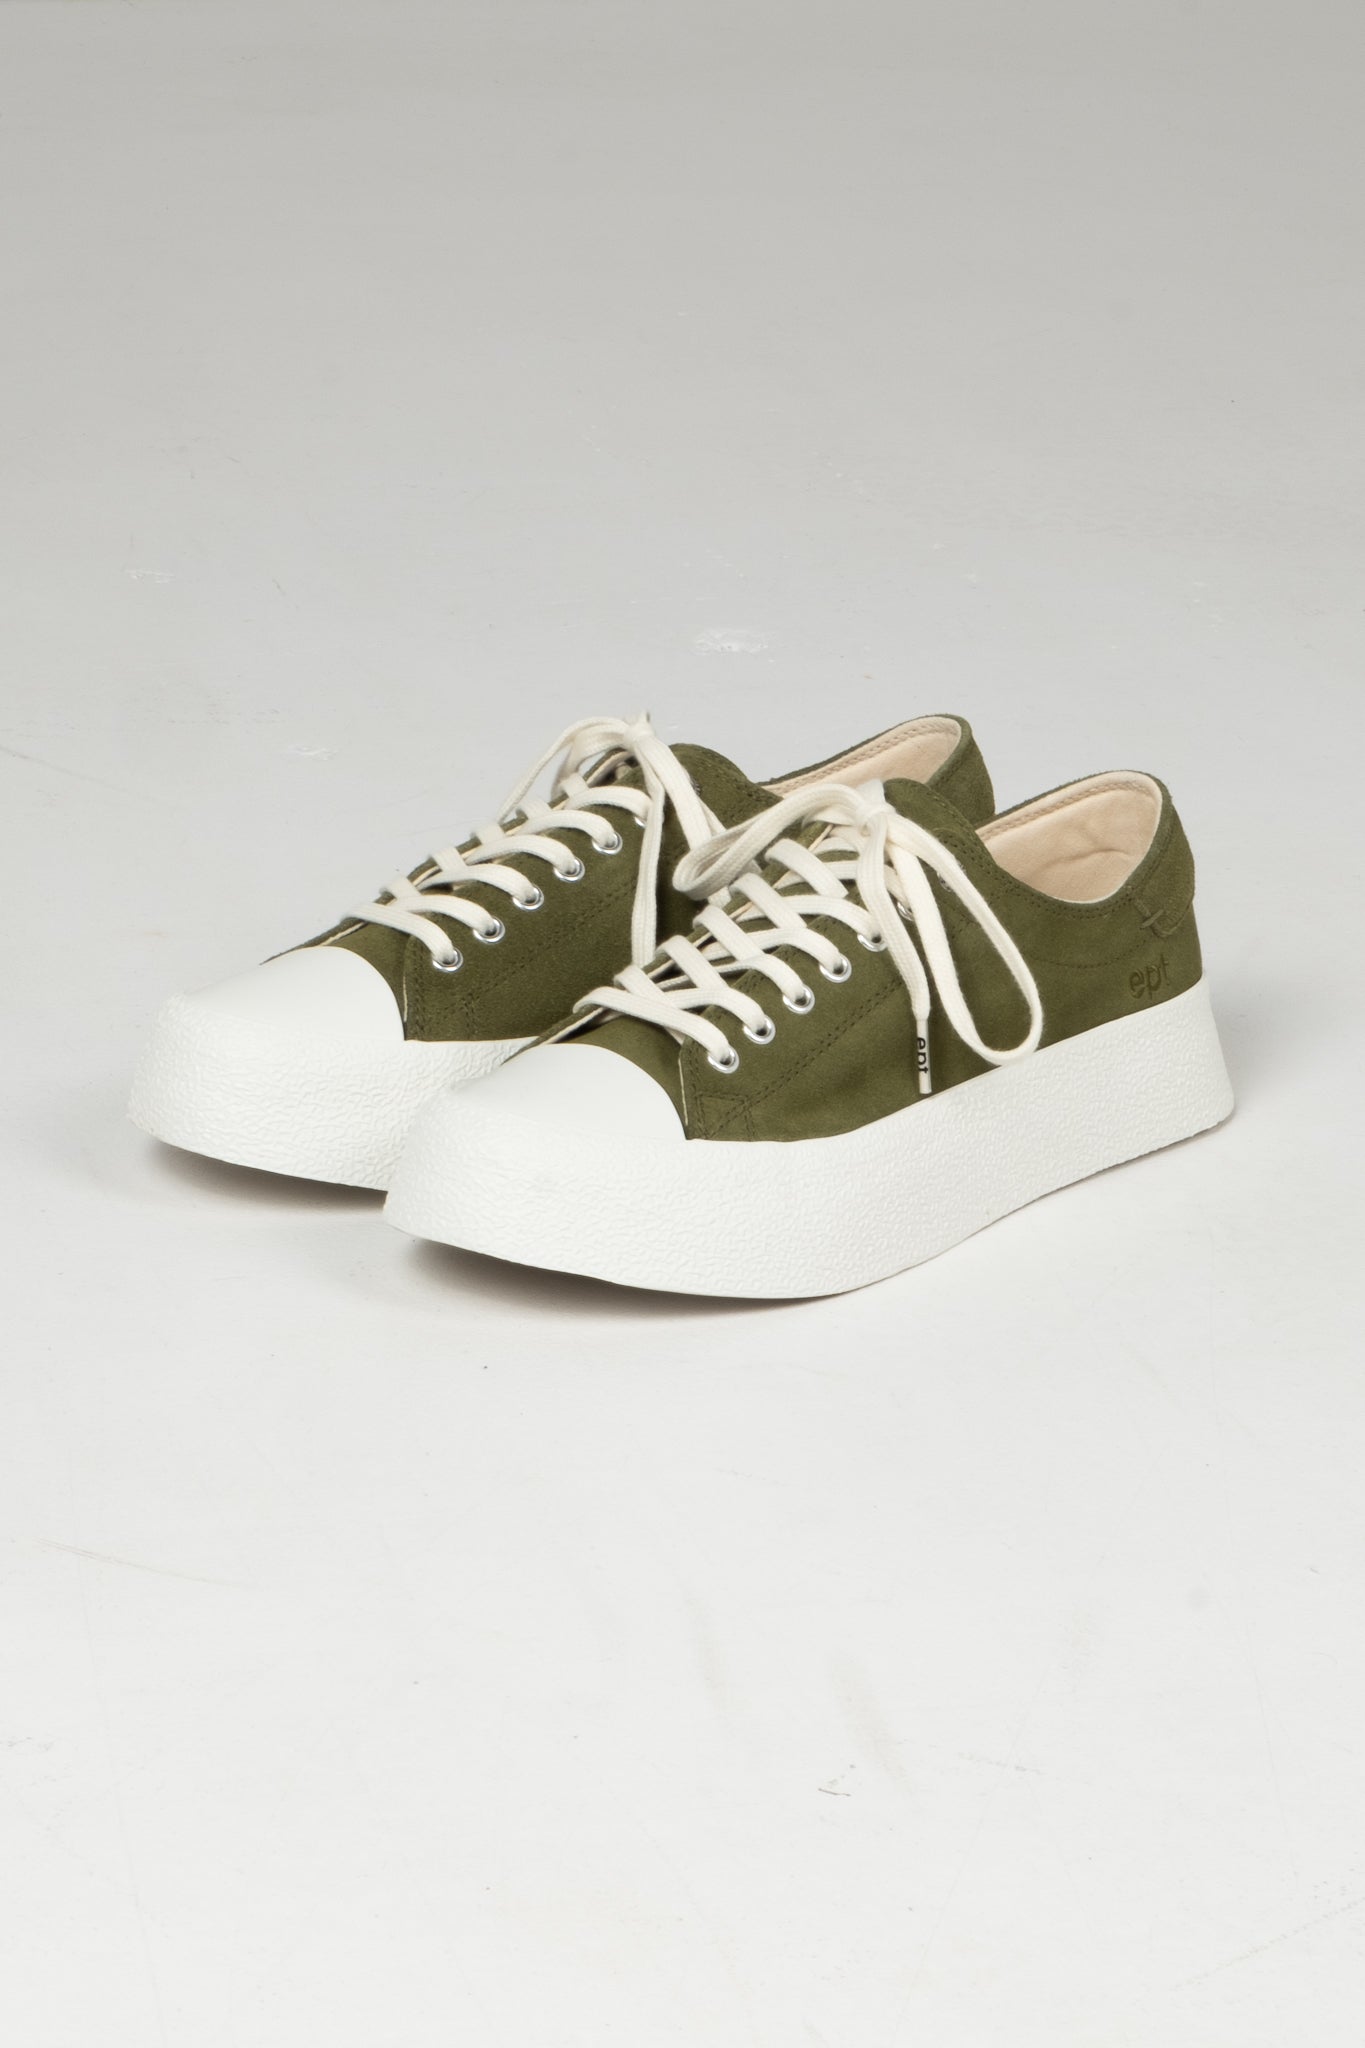 'Dive' Suede - Olive